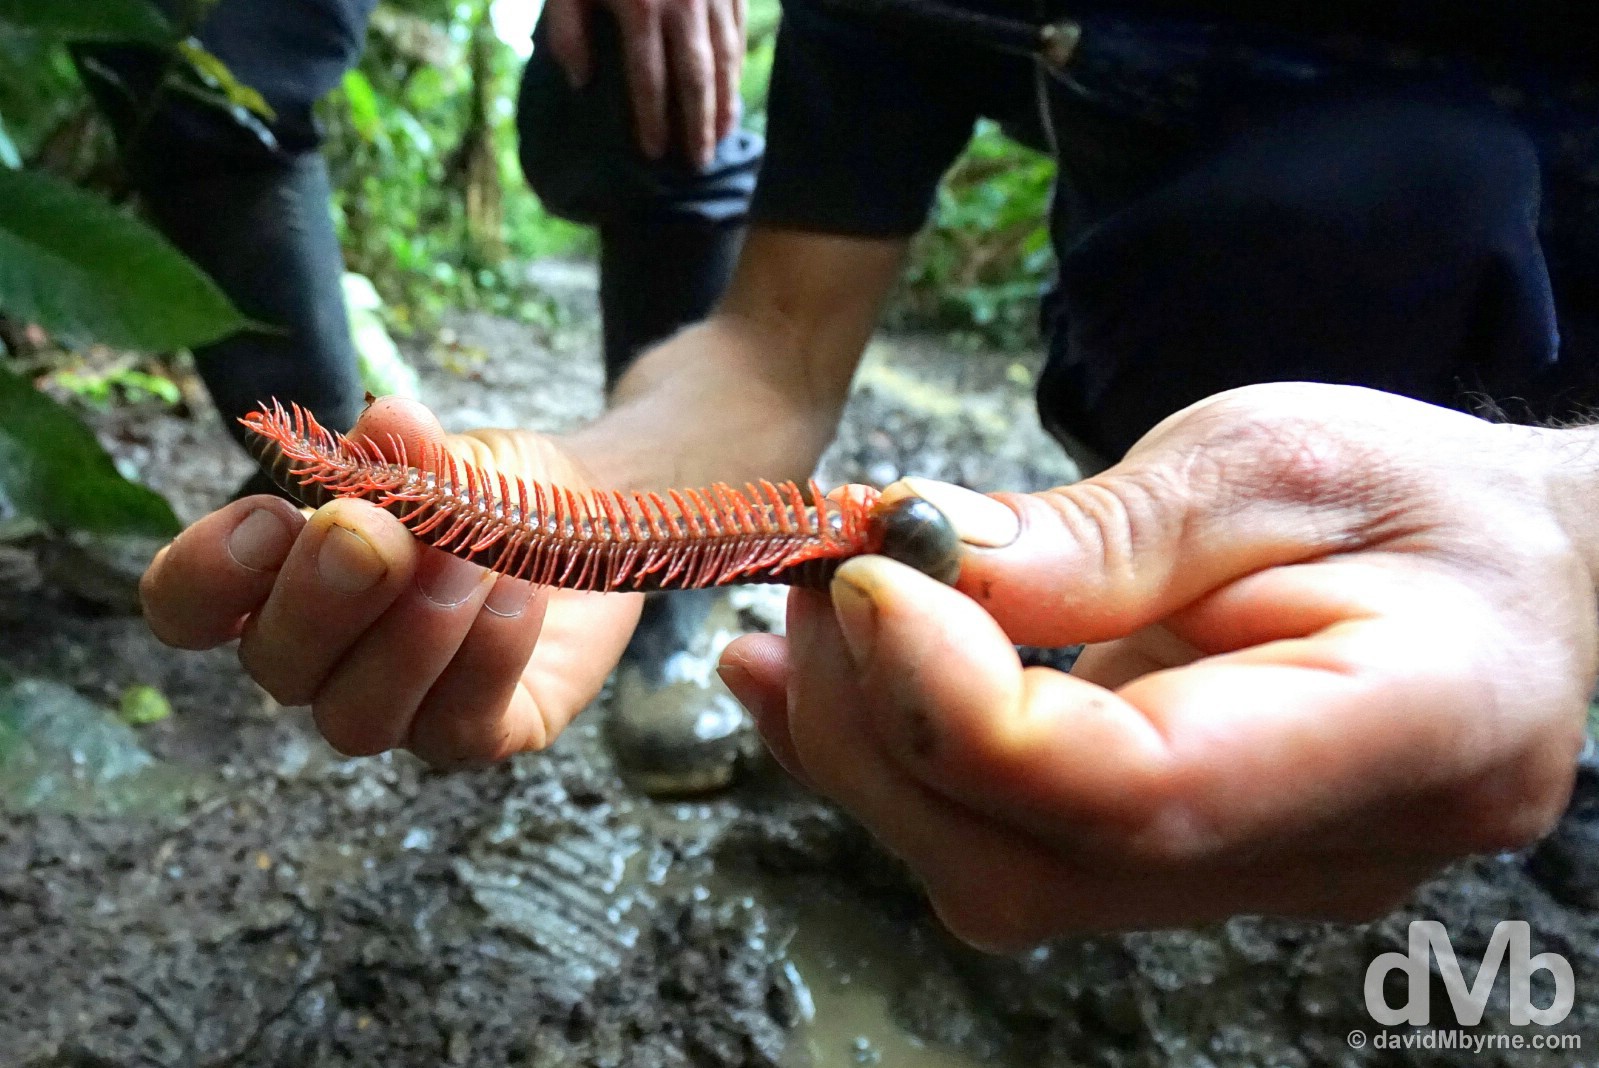 One of the rain forest creepy crawlies during a forest walk, Ecuador. July 12, 2015.